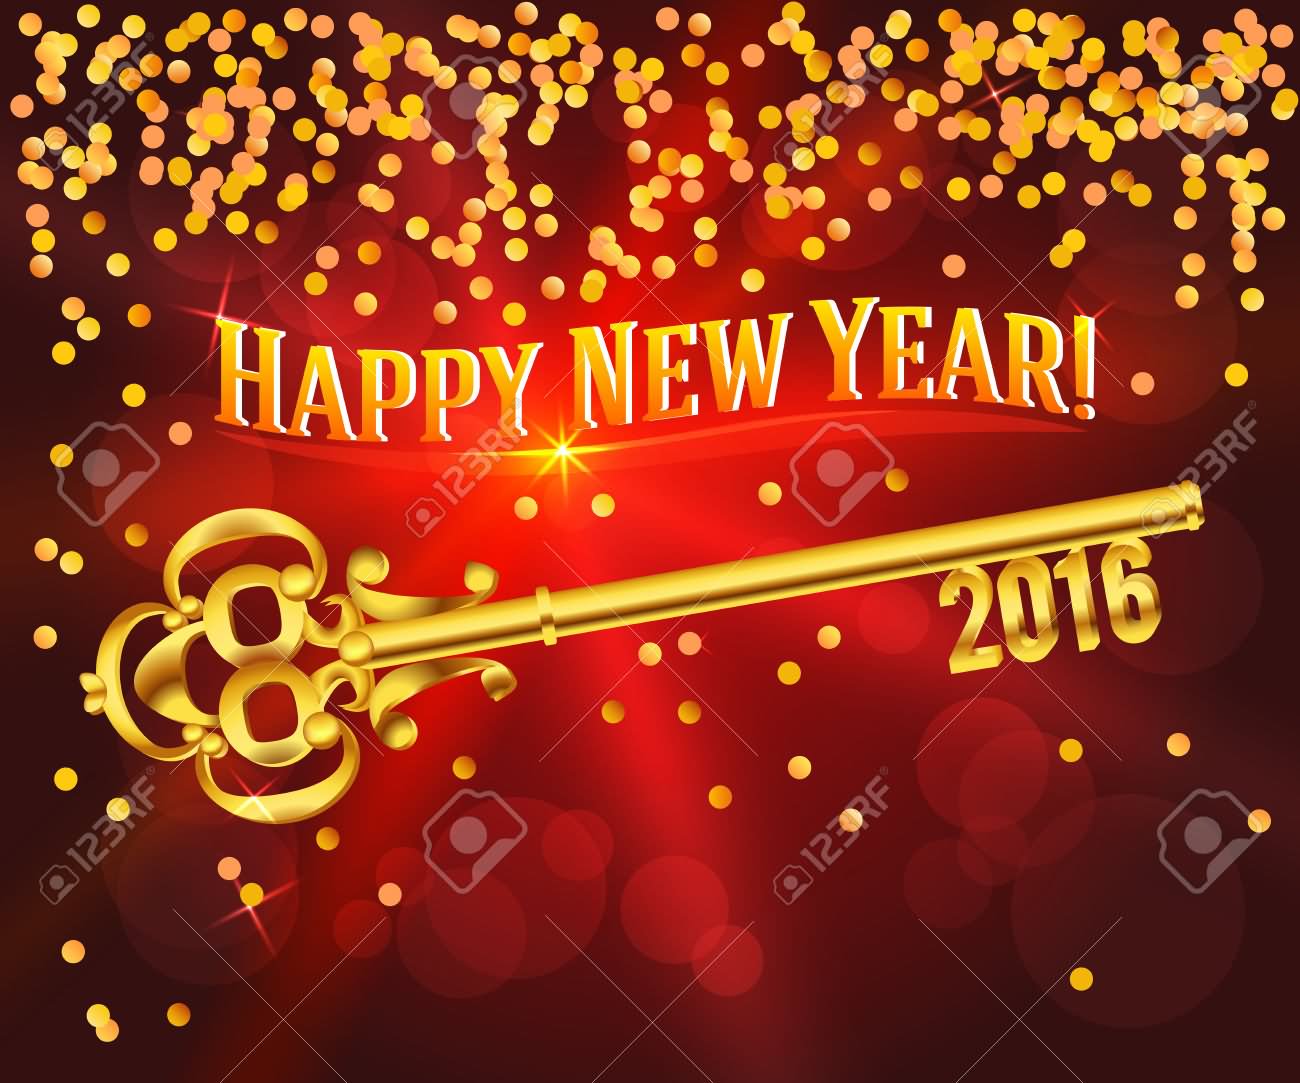 Happy New Year 2016 Vintage Golden Key Picture